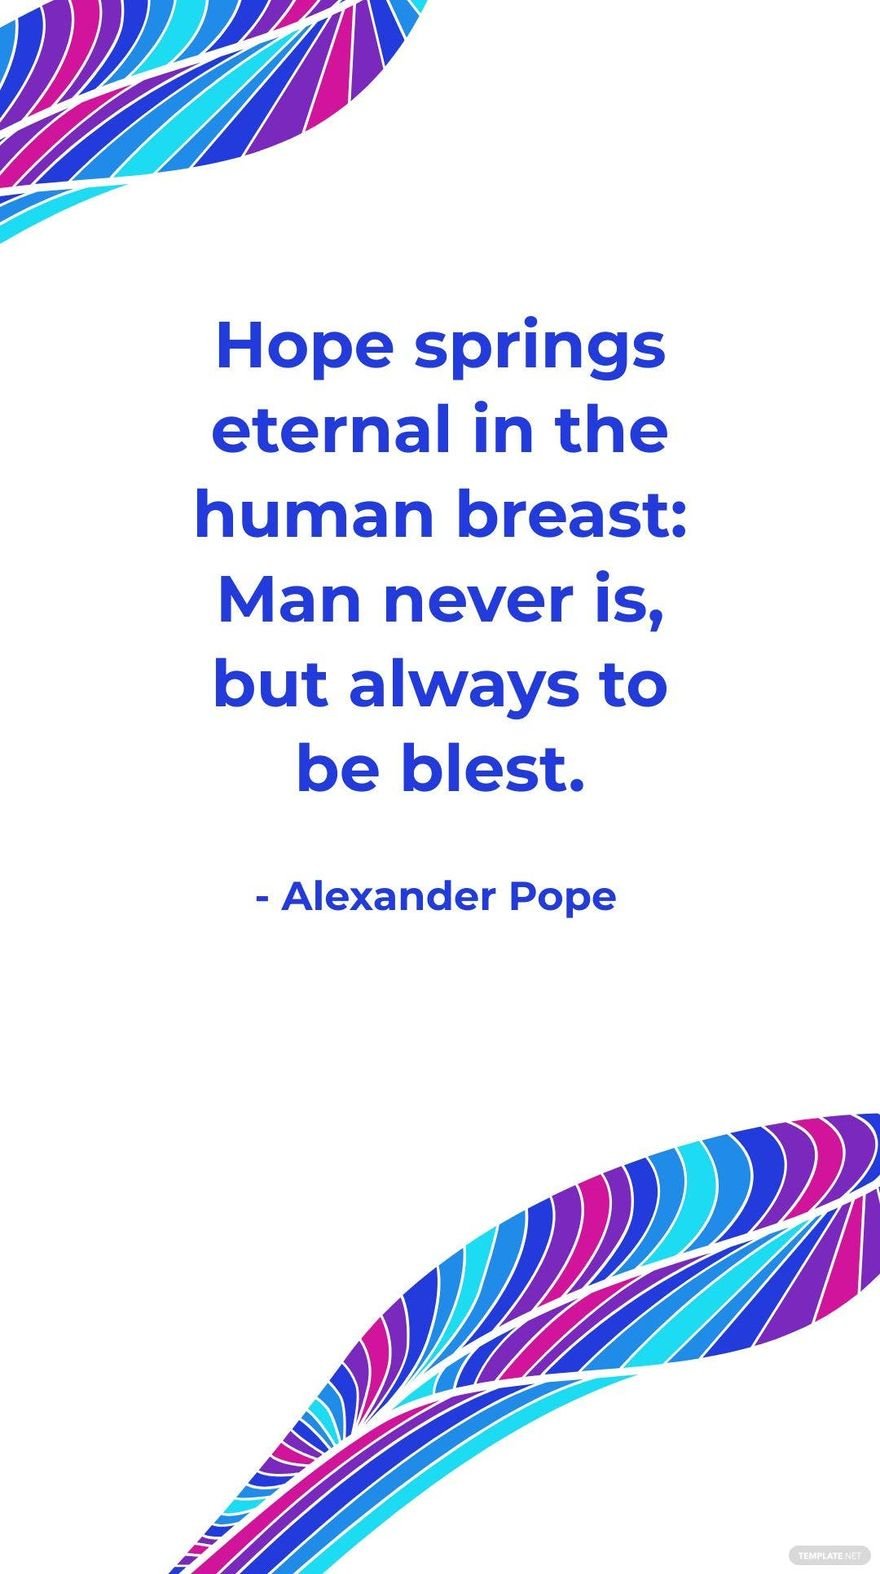 Alexander Pope - Hope springs eternal in the human breast: Man never is, but always to be blest.